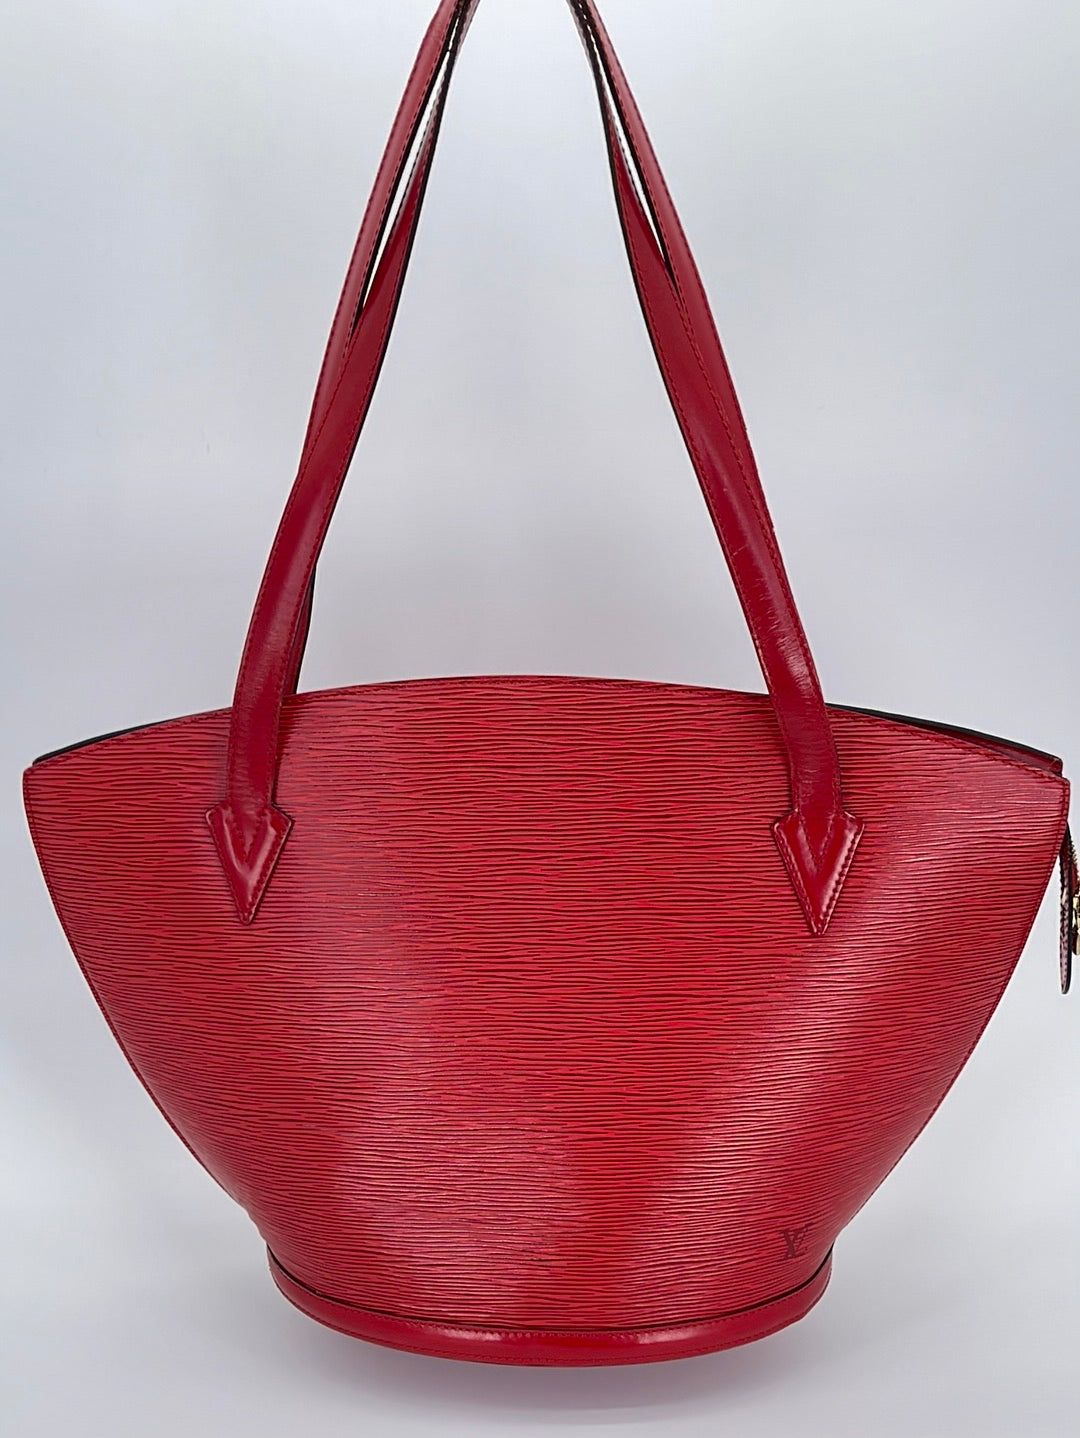 Past auction: A Louis Vuitton St. Jacques GM Shopping Tote in